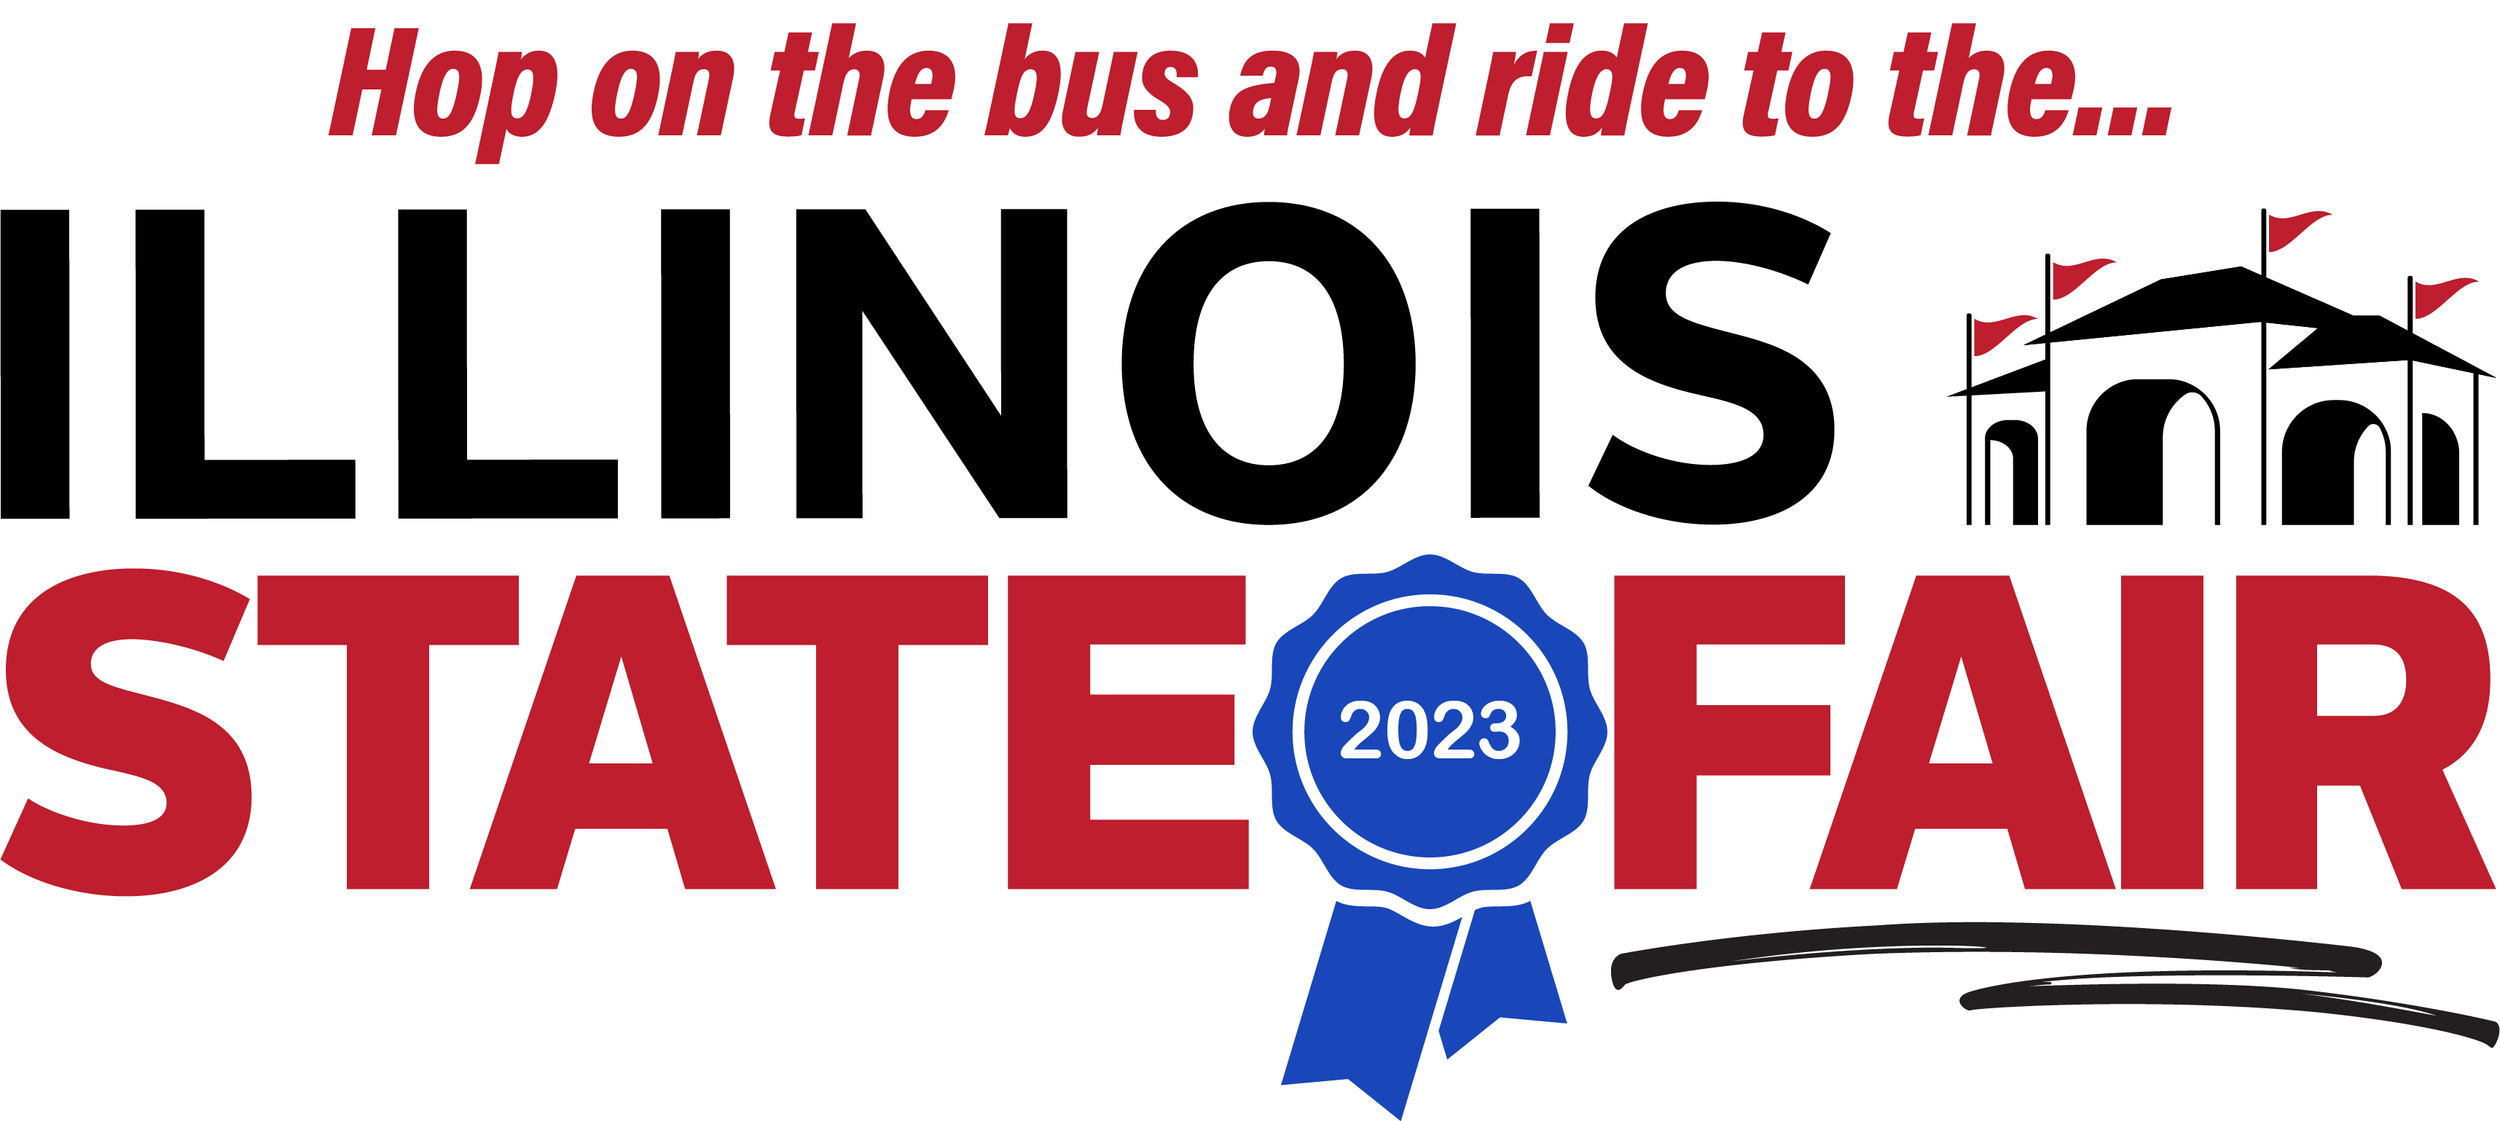 2023 state fair logo for web.png